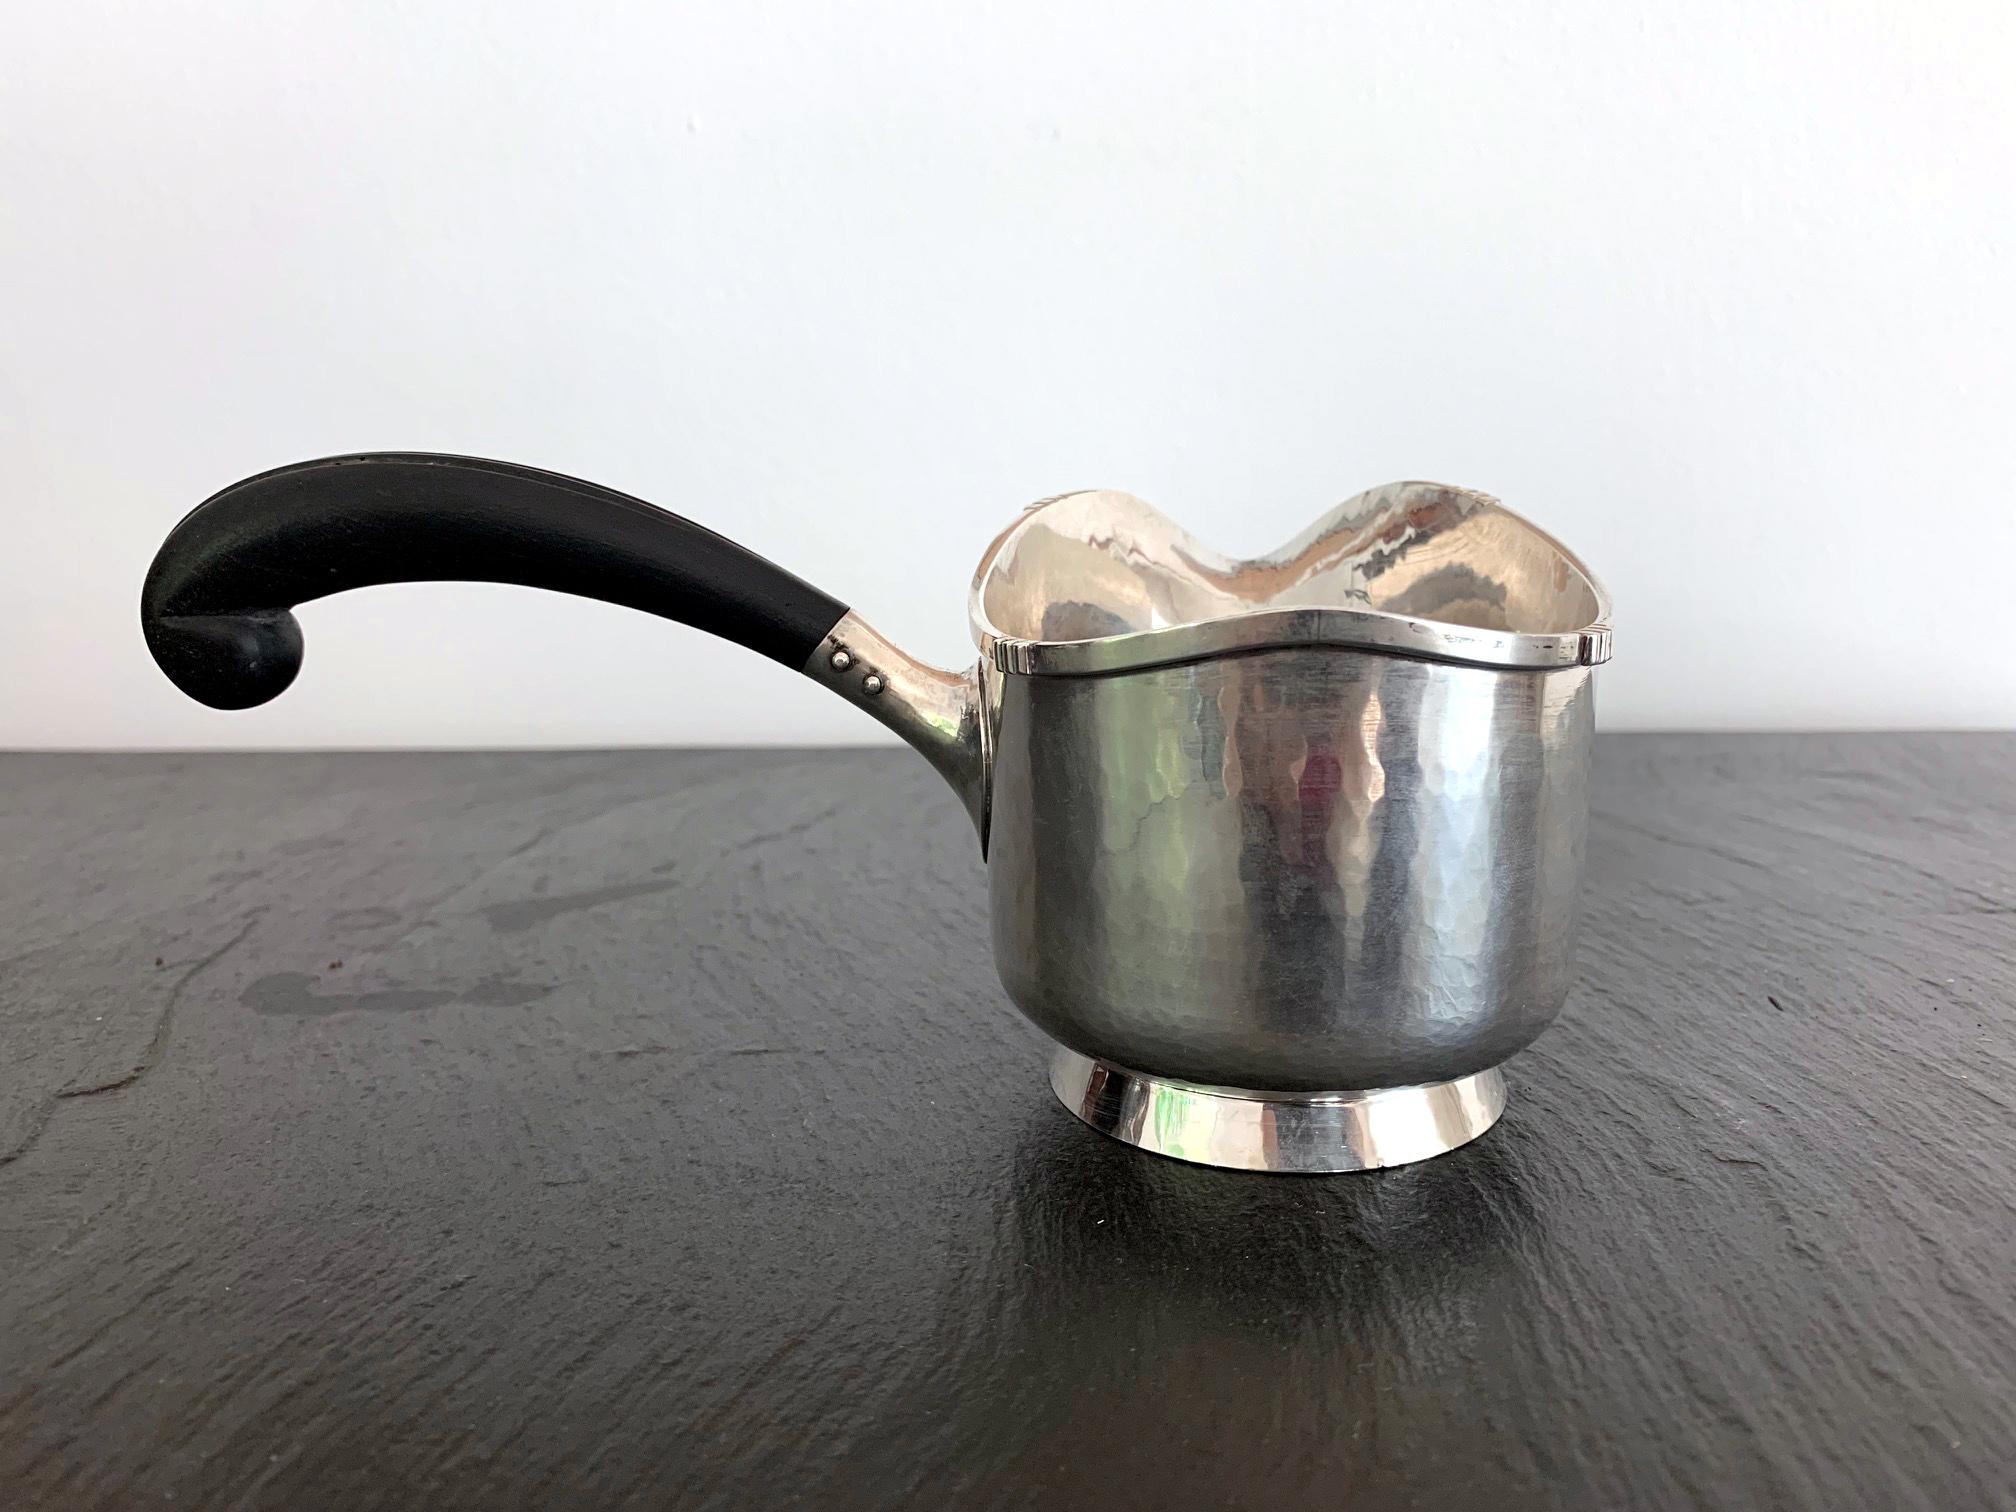 A sterling silver server piece for gravy, sauce or brandy by The Kalo Shop, Chicago, with the model number #NS121. A relatively rare piece from the Norse Line designed and made for a short period in 1920s inspired by Danish aesthetic, featuring